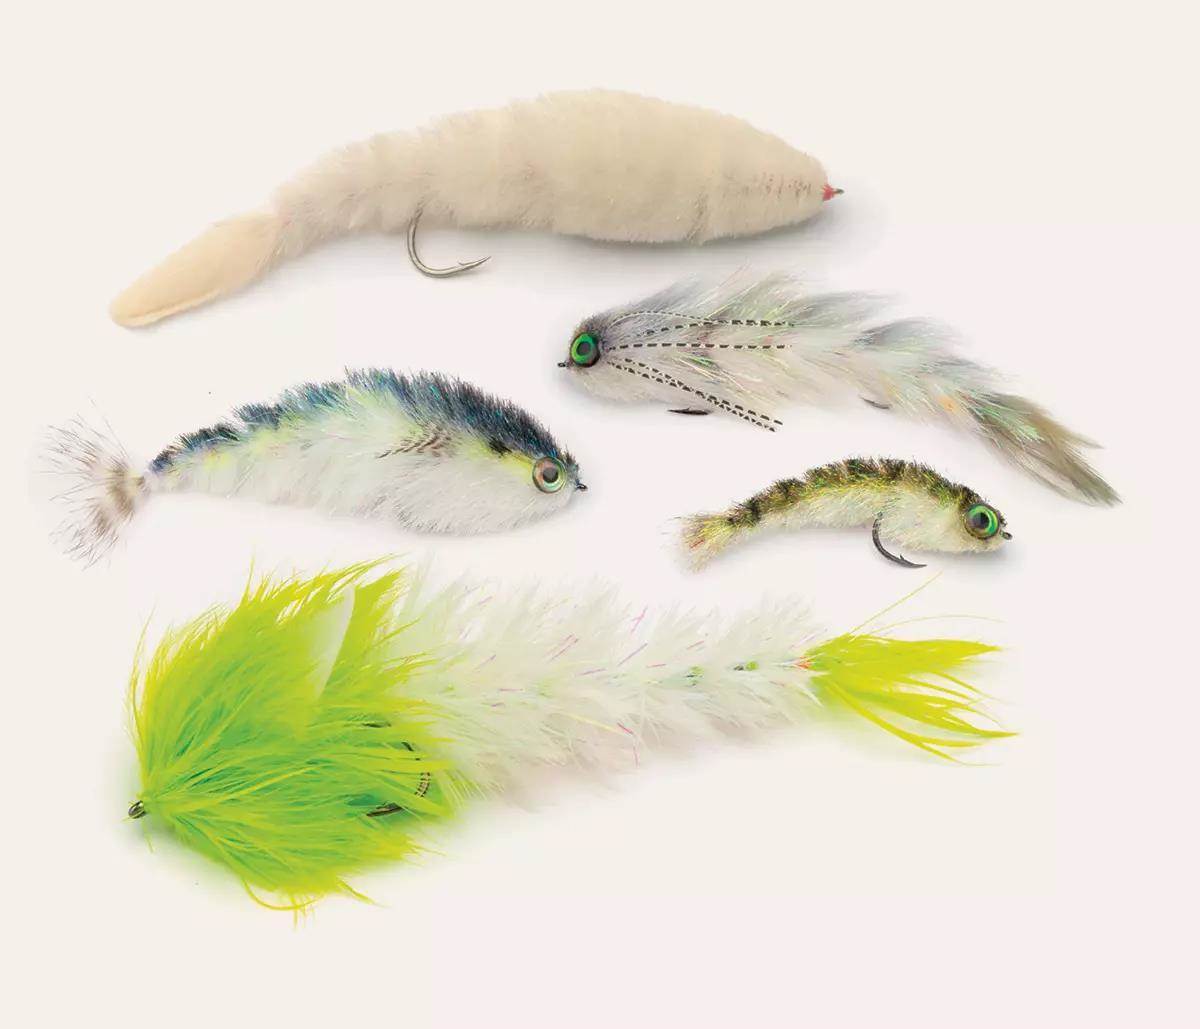 Norman Shad Fishing Baits, Lures & Flies for sale